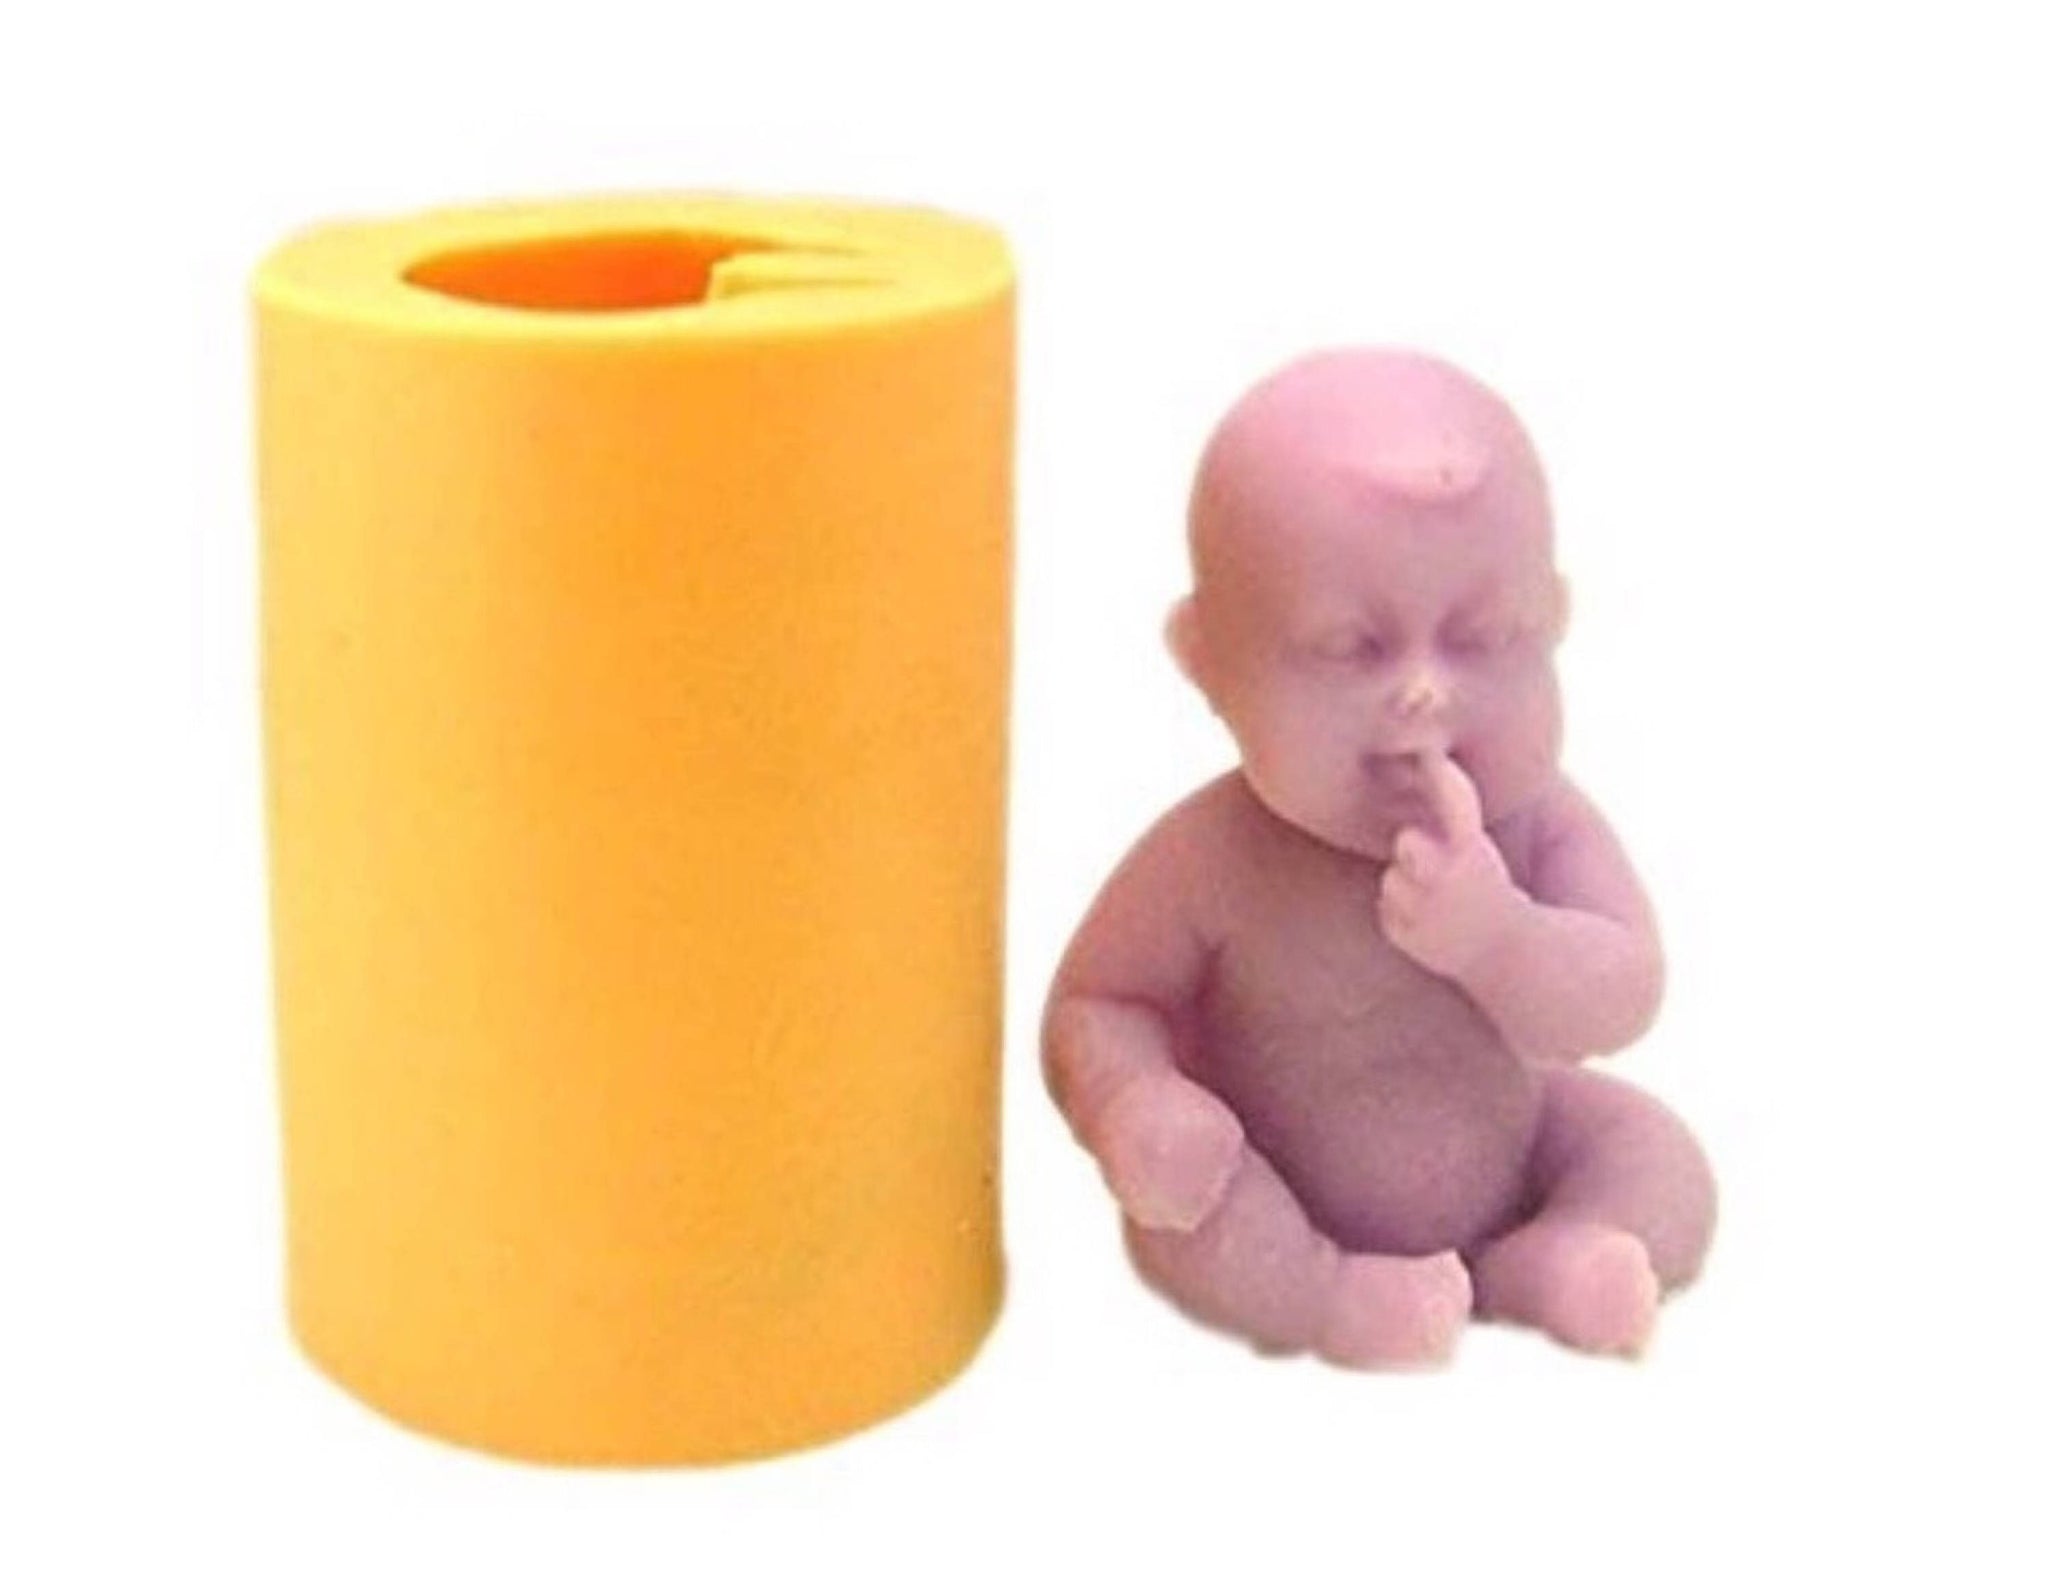 Sitting Baby Silicone Mold